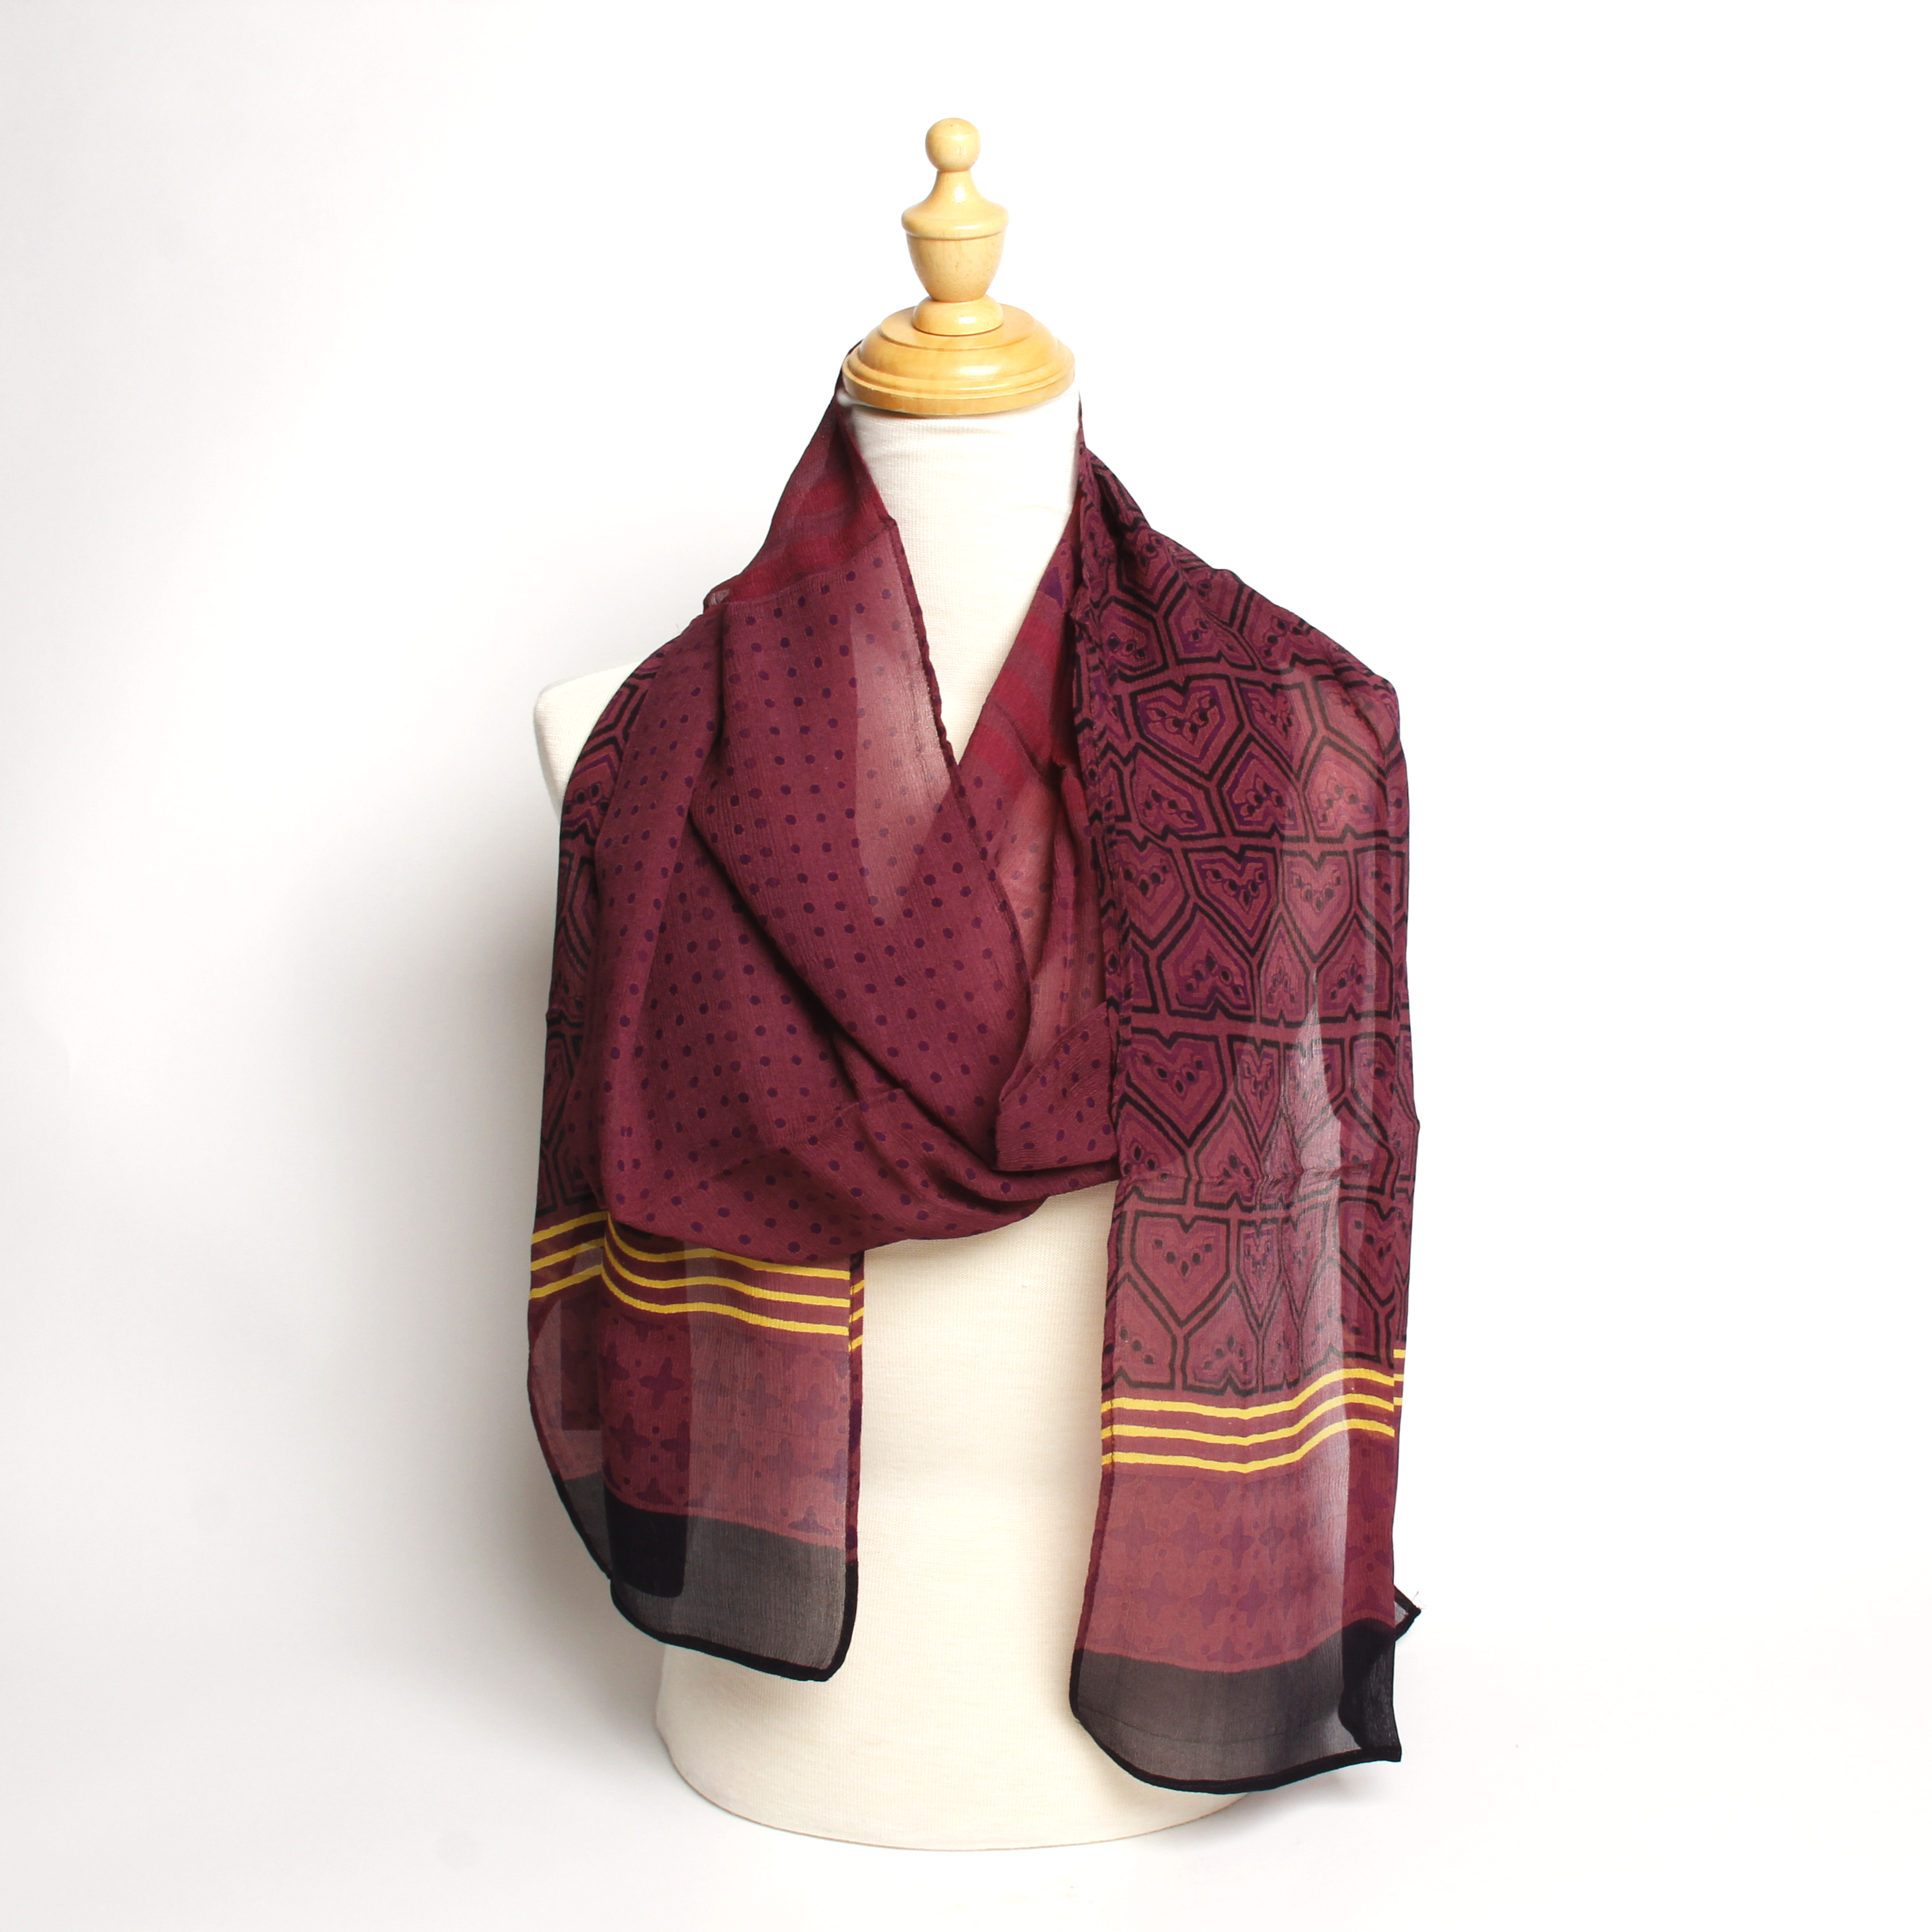 Harshita Designs: Berry Scarf Product Image 1 of 2